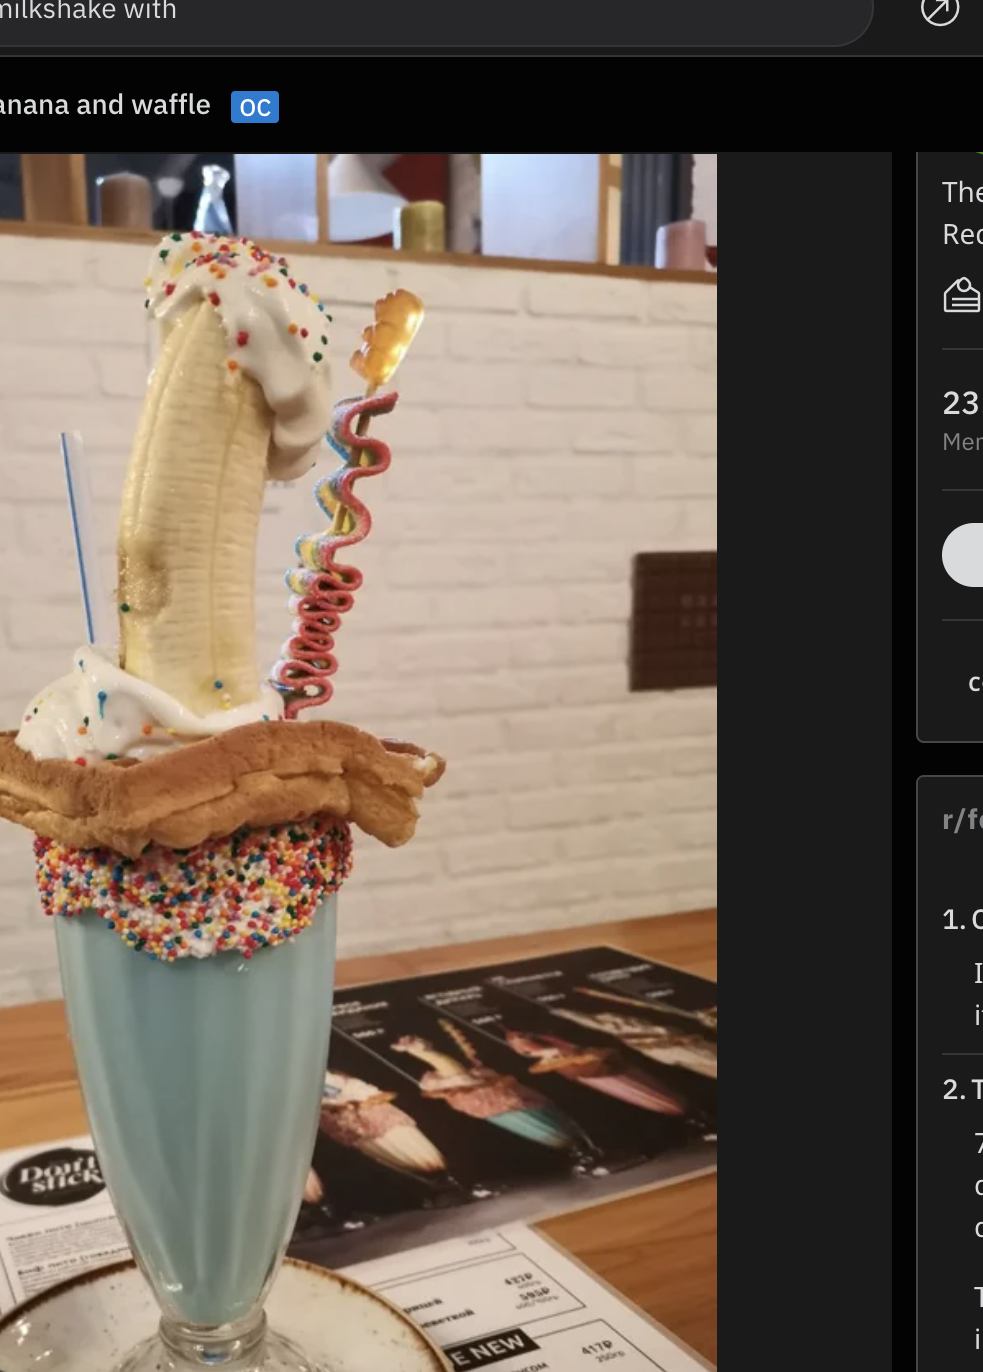 A milkshake is stacked with sprinkles, a waffle, a banana, sour candy, and whipped cream